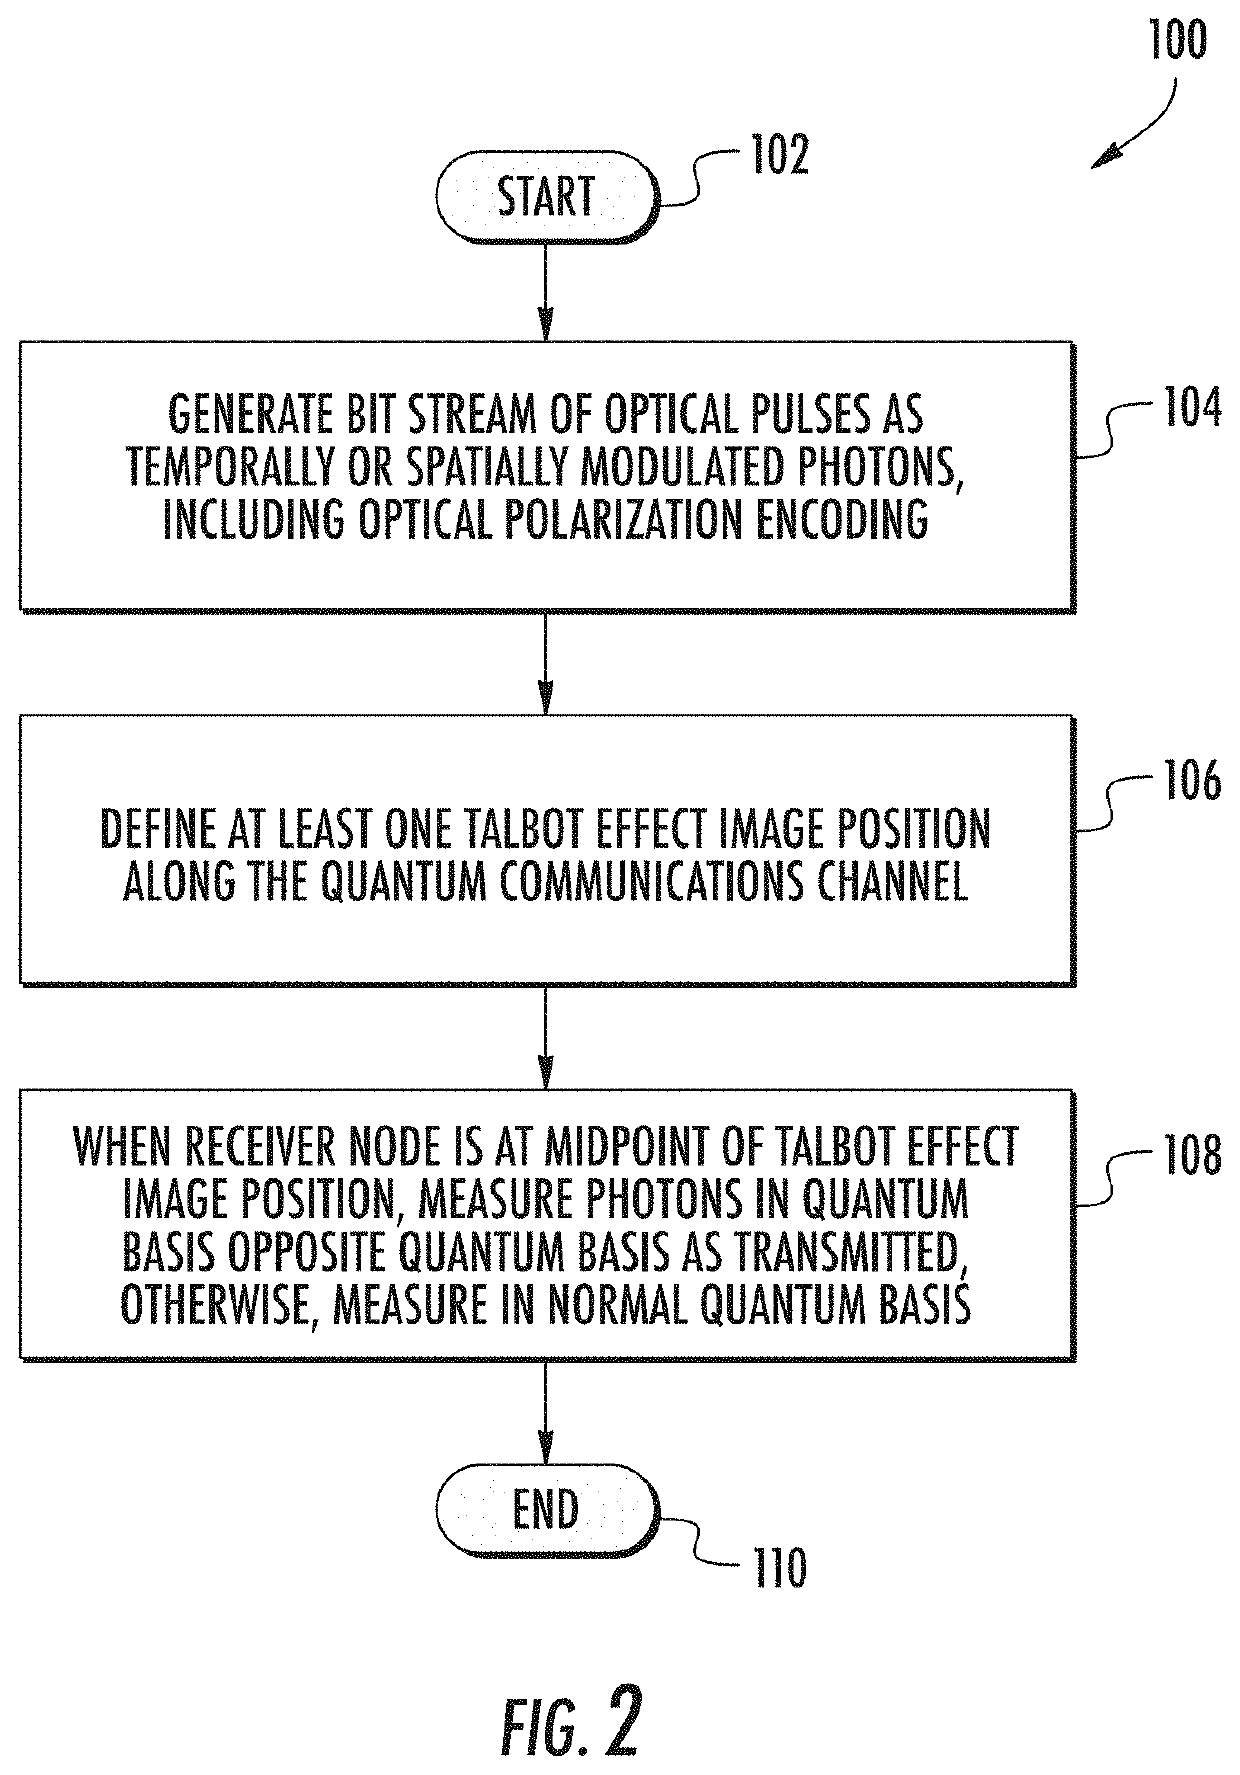 Quantum communication system having quantum key distribution and using a midpoint of the talbot effect image position and associated methods